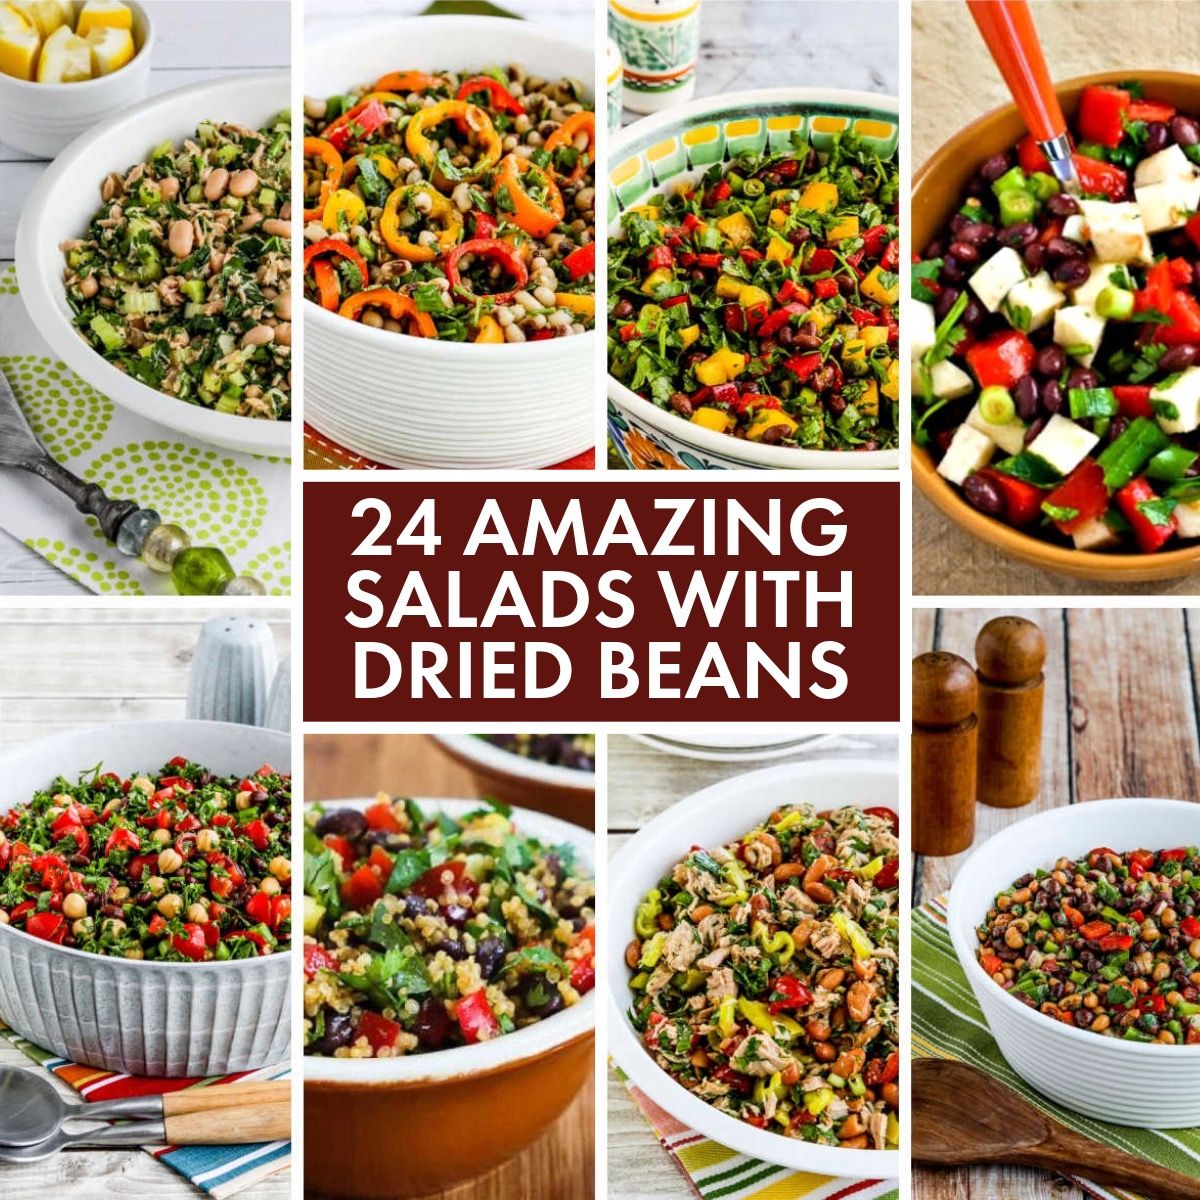 24 Amazing Salads with Dried Beans collage with text overlay showing featured recipes.